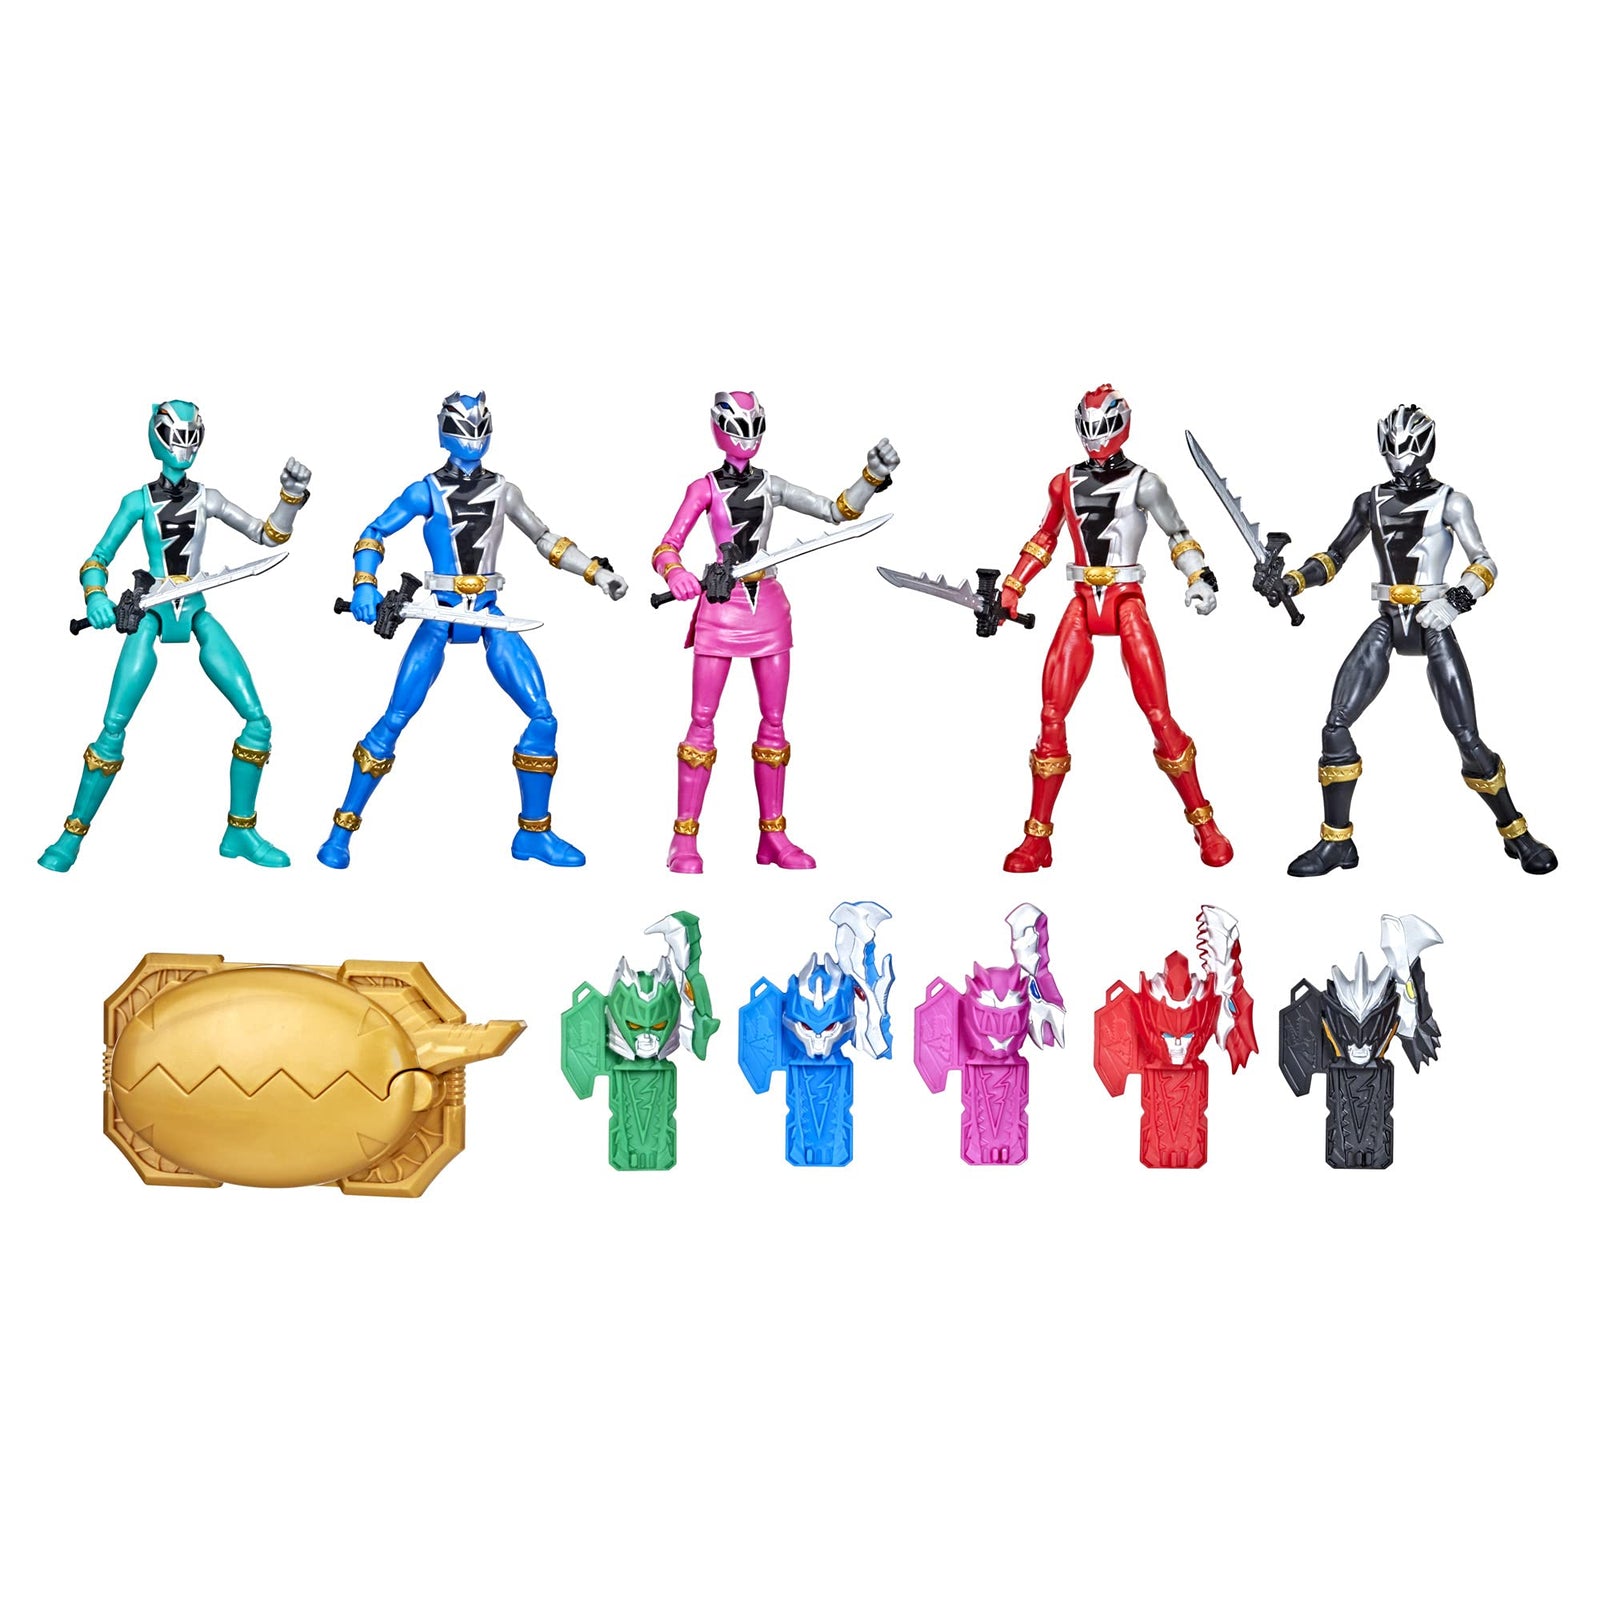 Power Rangers Dino Fury 5 Ranger Team Multipack 6-Inch Action Figure Toys with Dino Fury Keys and Chromafury Saber Weapon Accessories (Amazon Exclusive)